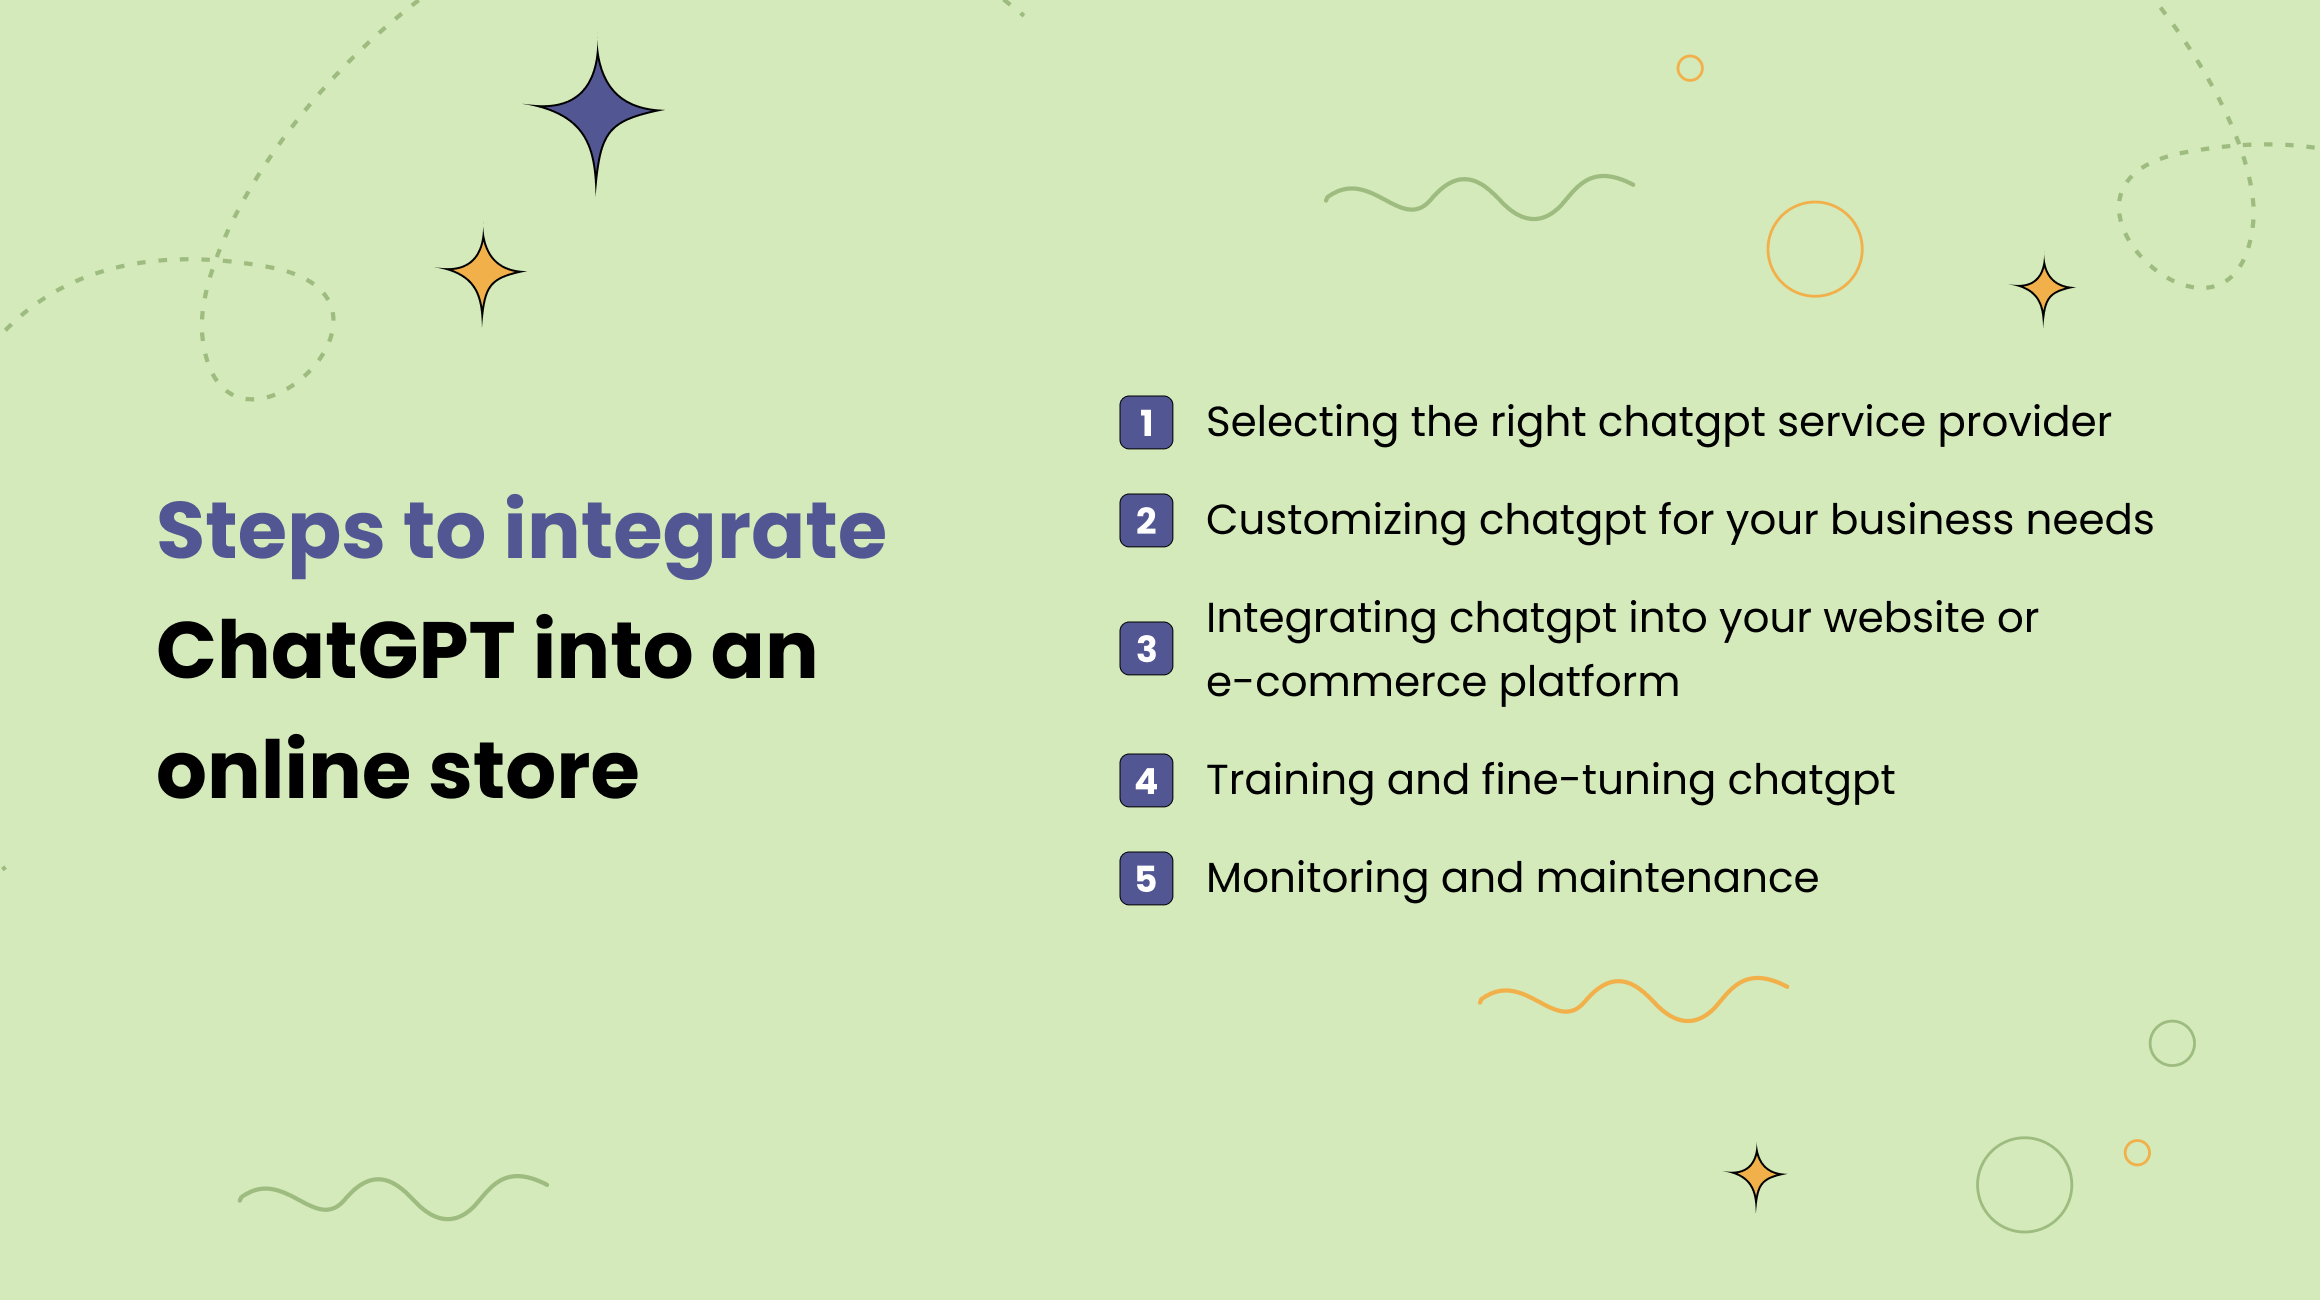 Steps to Integrate ChatGPT